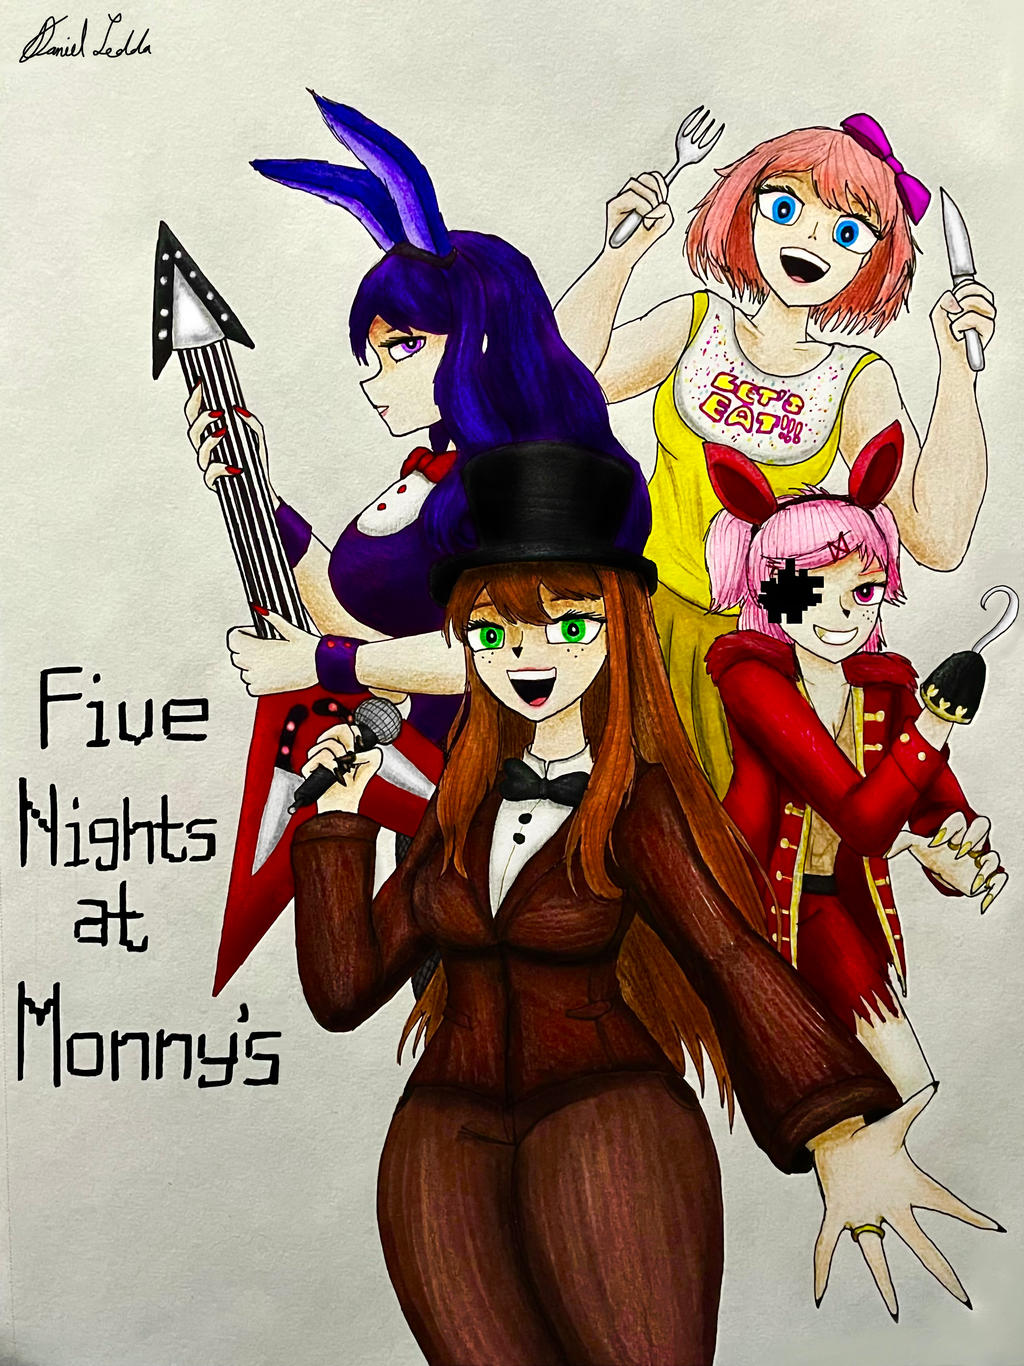 One Night at Flumpty's by Xamp6 on DeviantArt